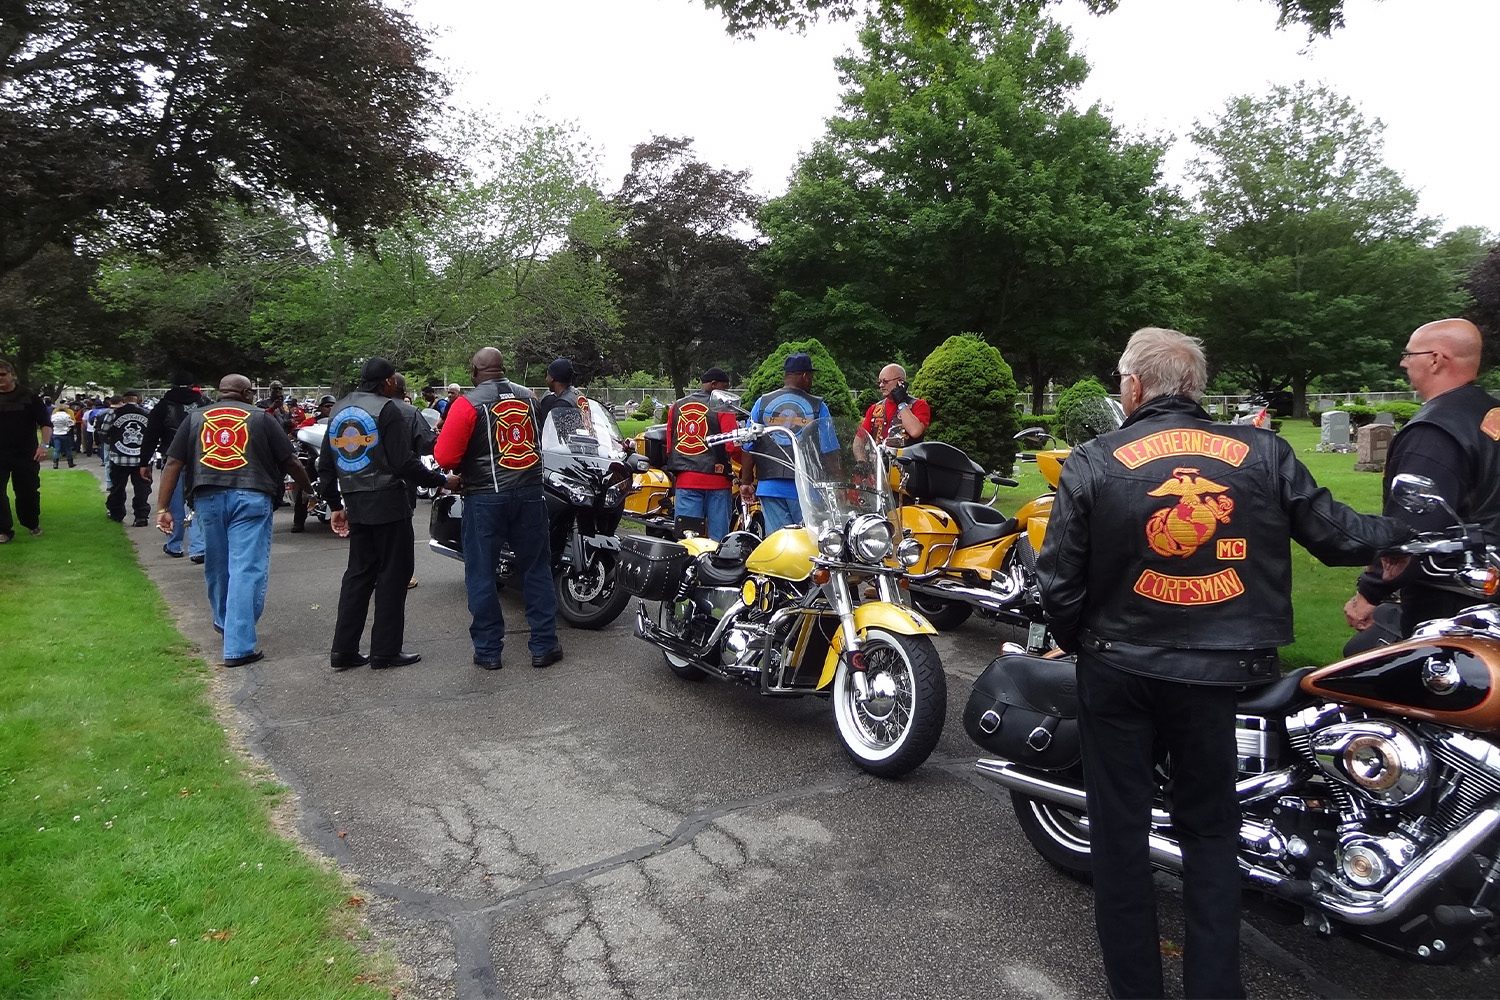 Bikers on the road, waiting to ride off 